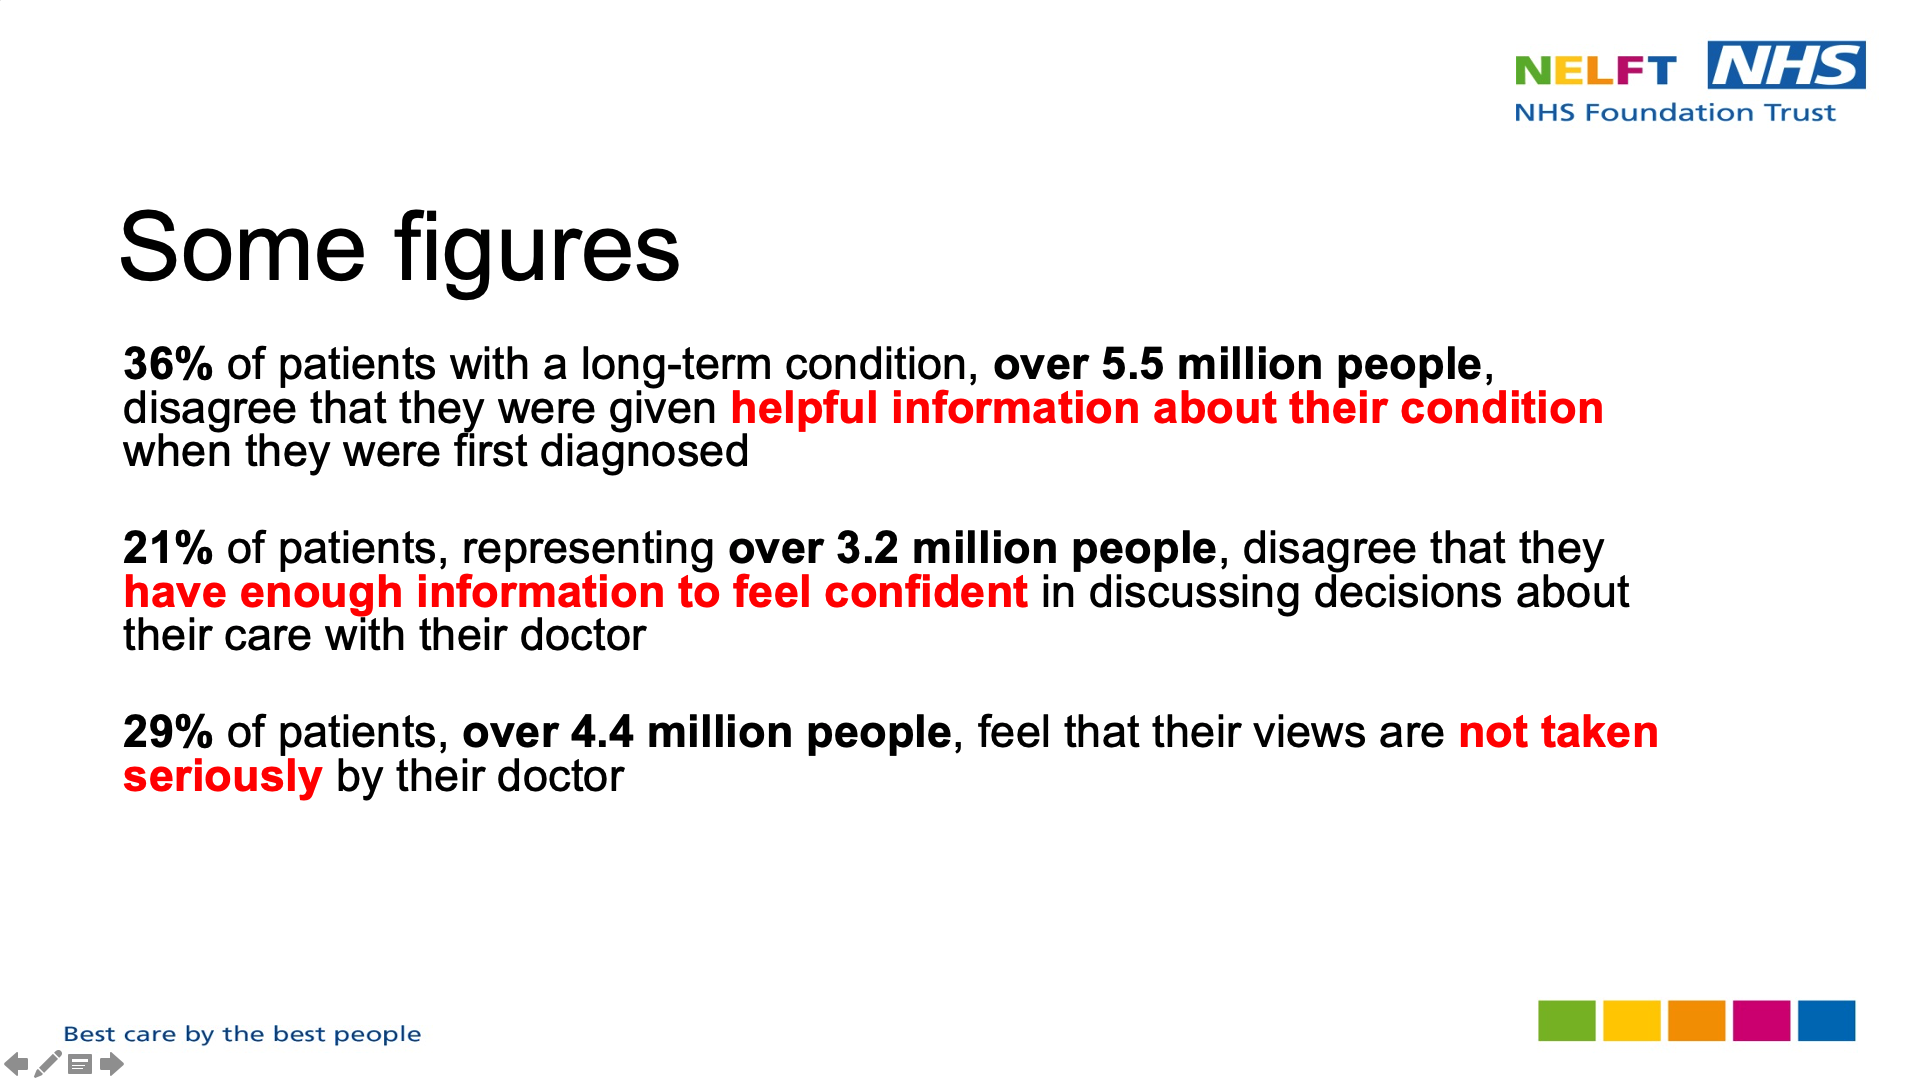 Title: Some figures. Text on page: 36% of patients with a long-term condition, over 5.5 million people, disagree that they were given helpful information about their condition when they were first diagnosed 21% of patients, representing over 3.2 million people, disagree that they have enough information to feel confident in discussing decisions about their care with their doctor 29% of patients, over 4.4 million people, feel that their views are not taken seriously by their doctor